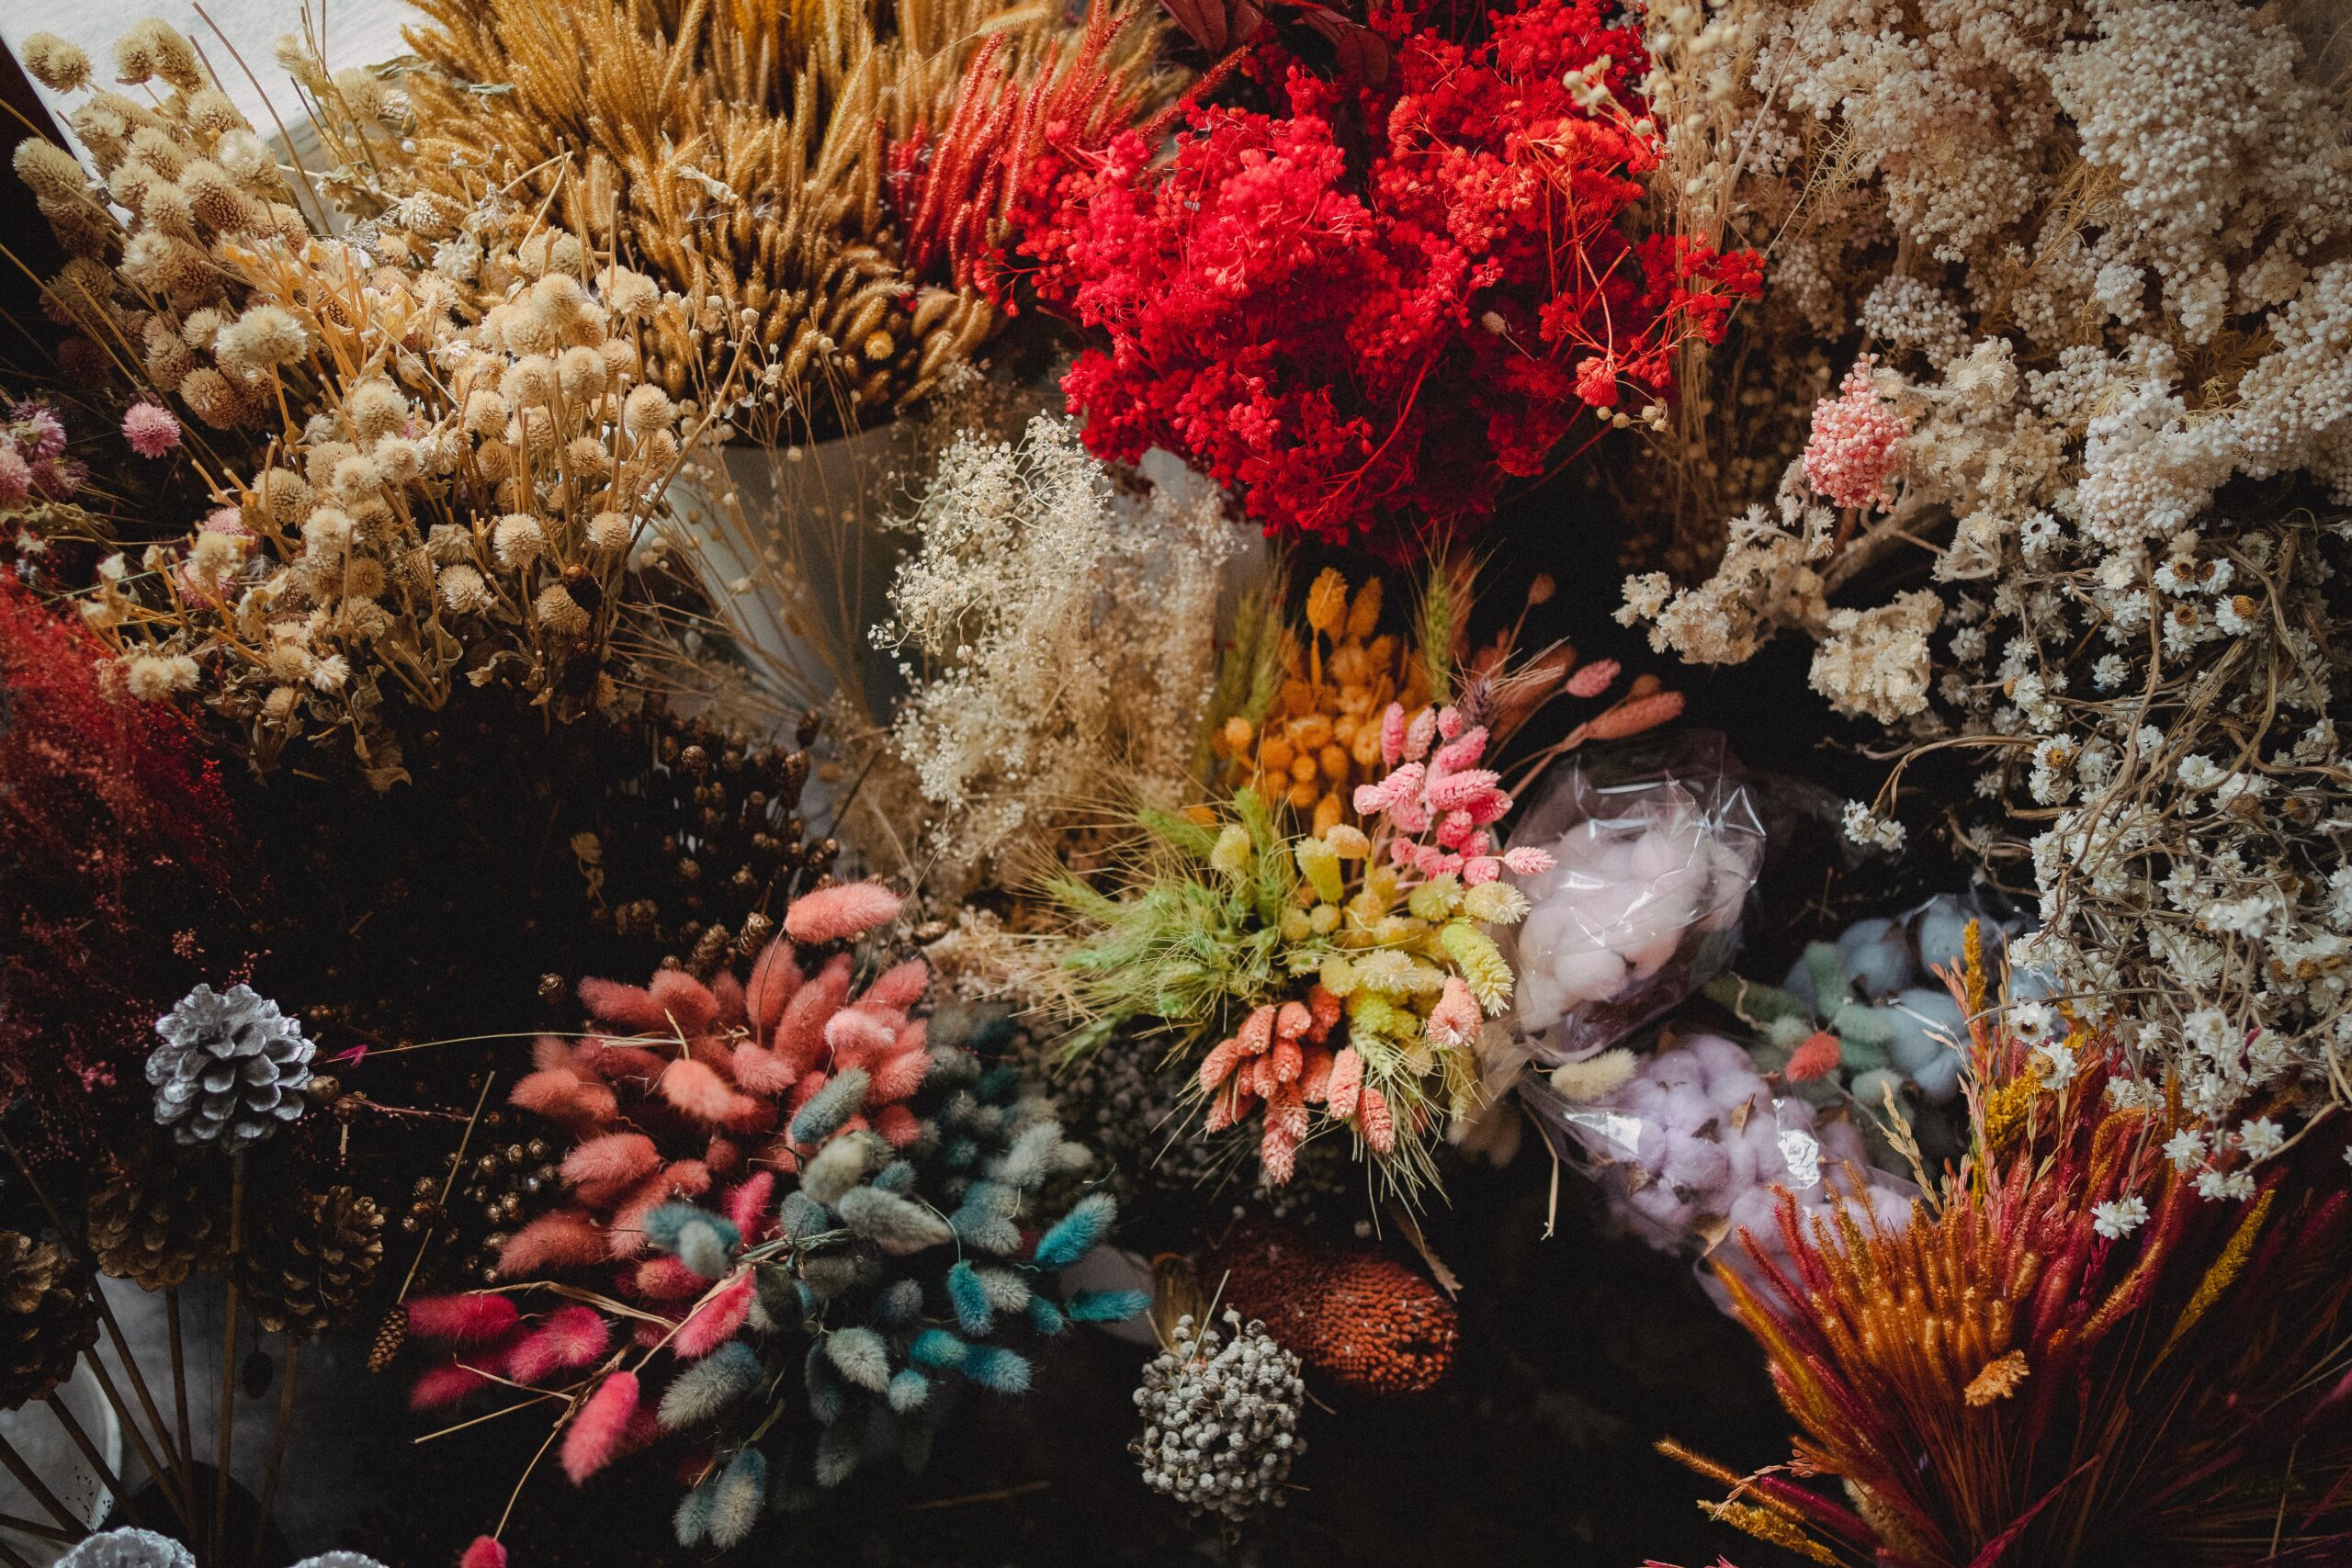 Top-down view of bouquets of various flowers, presumably for sale at a market.